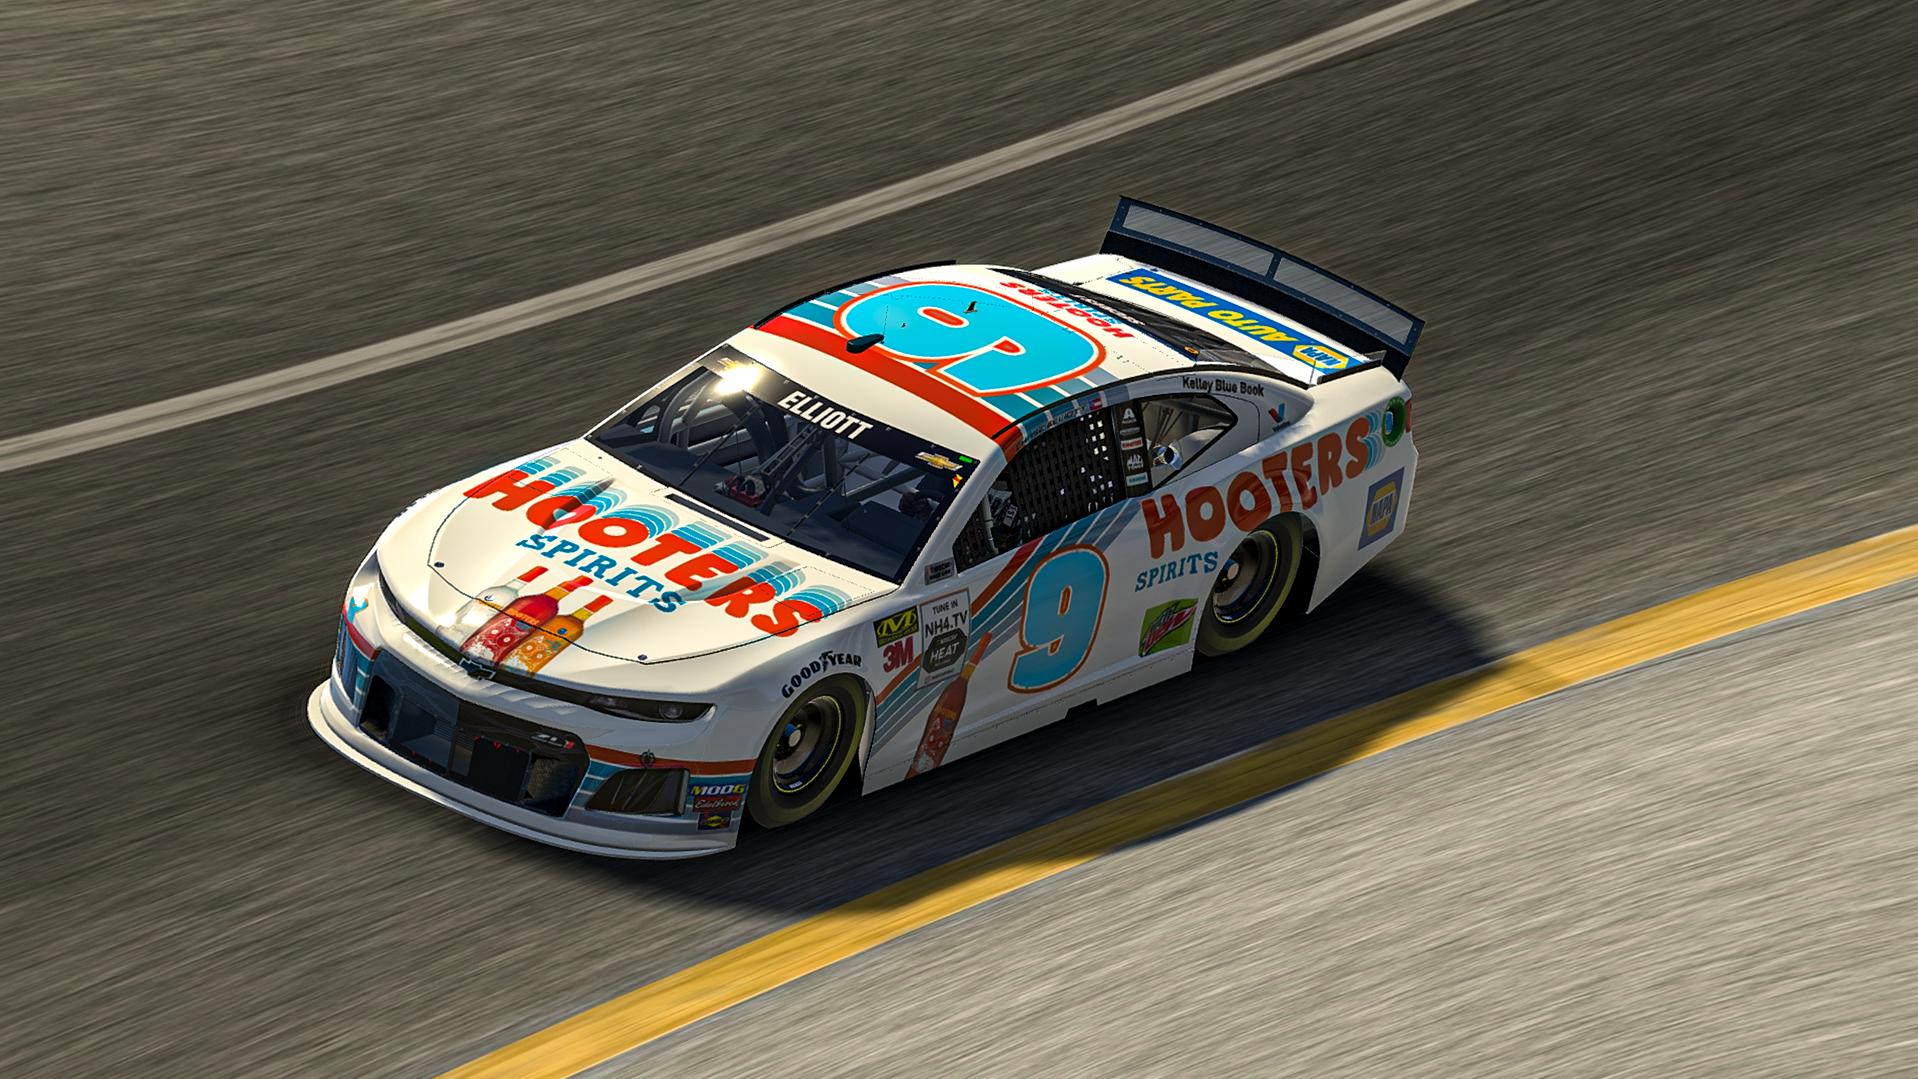 Preview of Chase Elliot - 2019 Hooters Spirits  by Nicholas H.